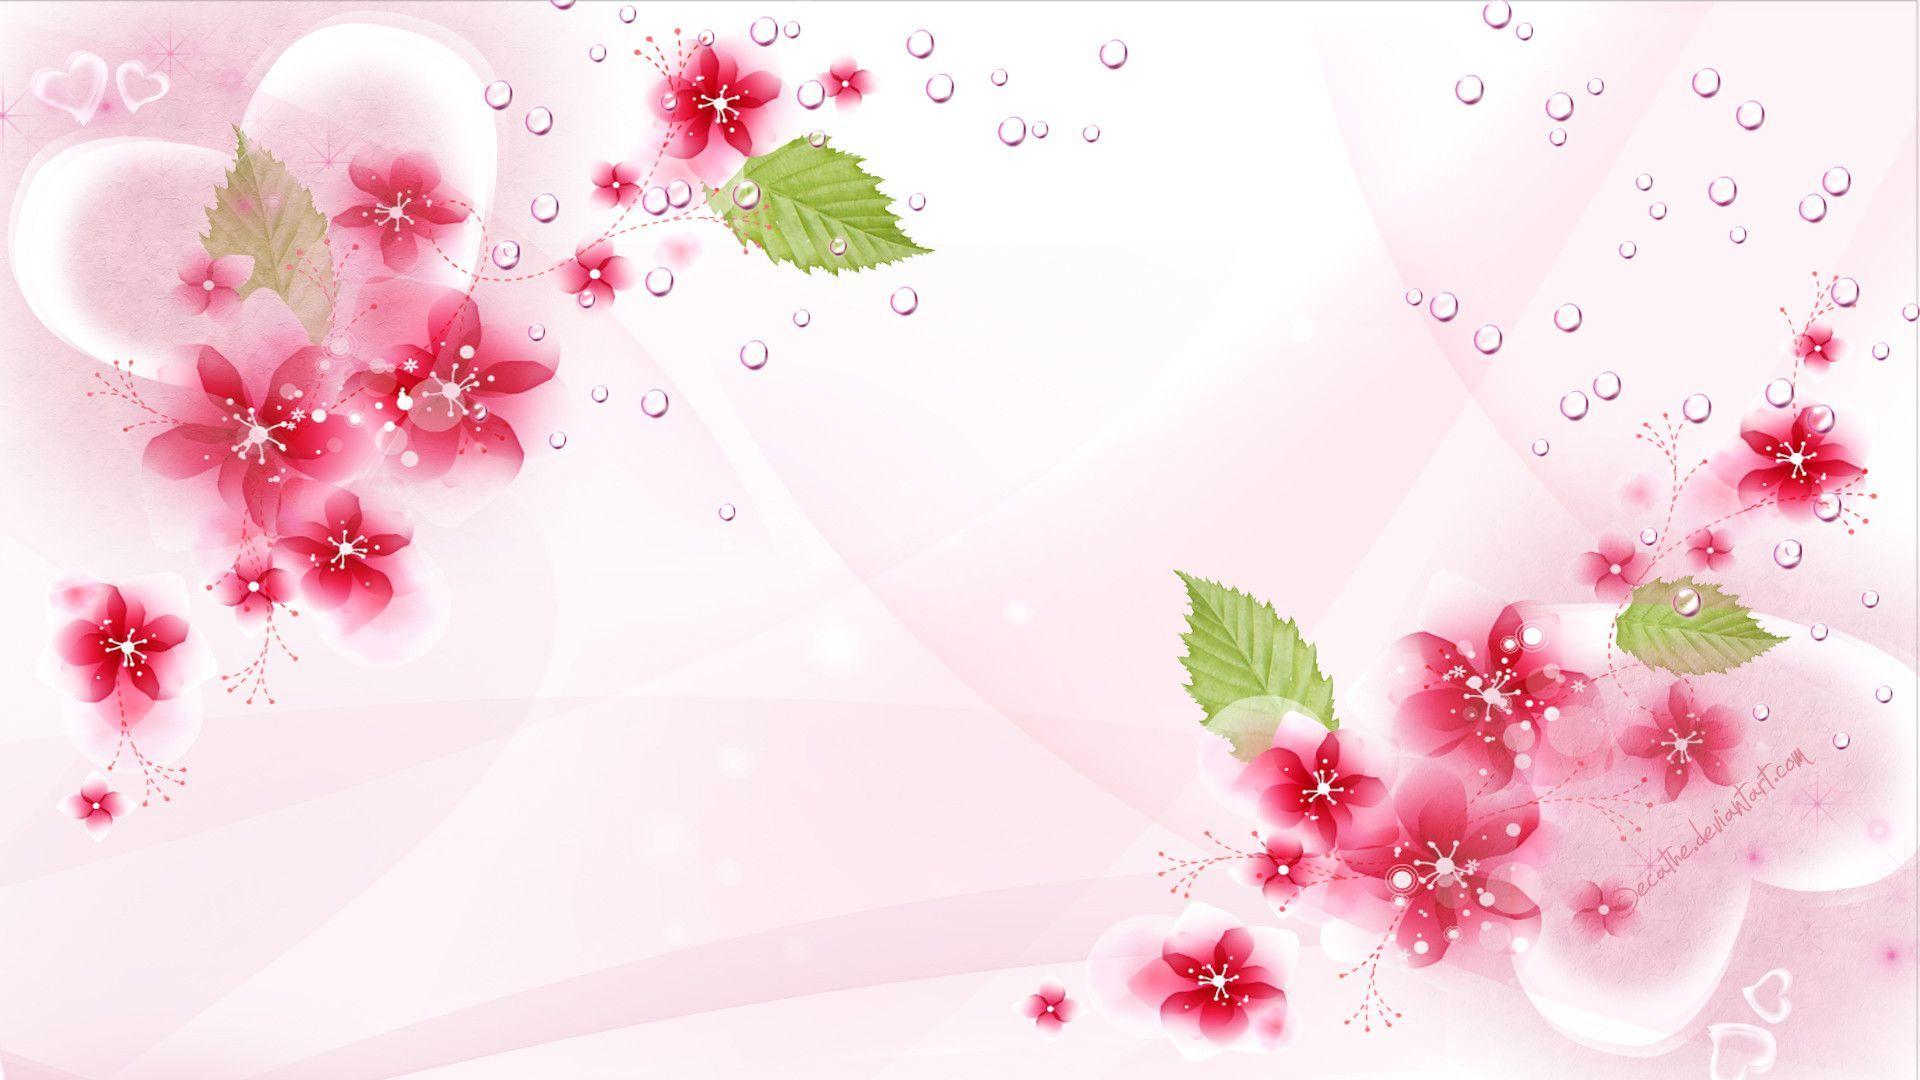 Rose Flowers Backgrounds - Wallpaper Cave